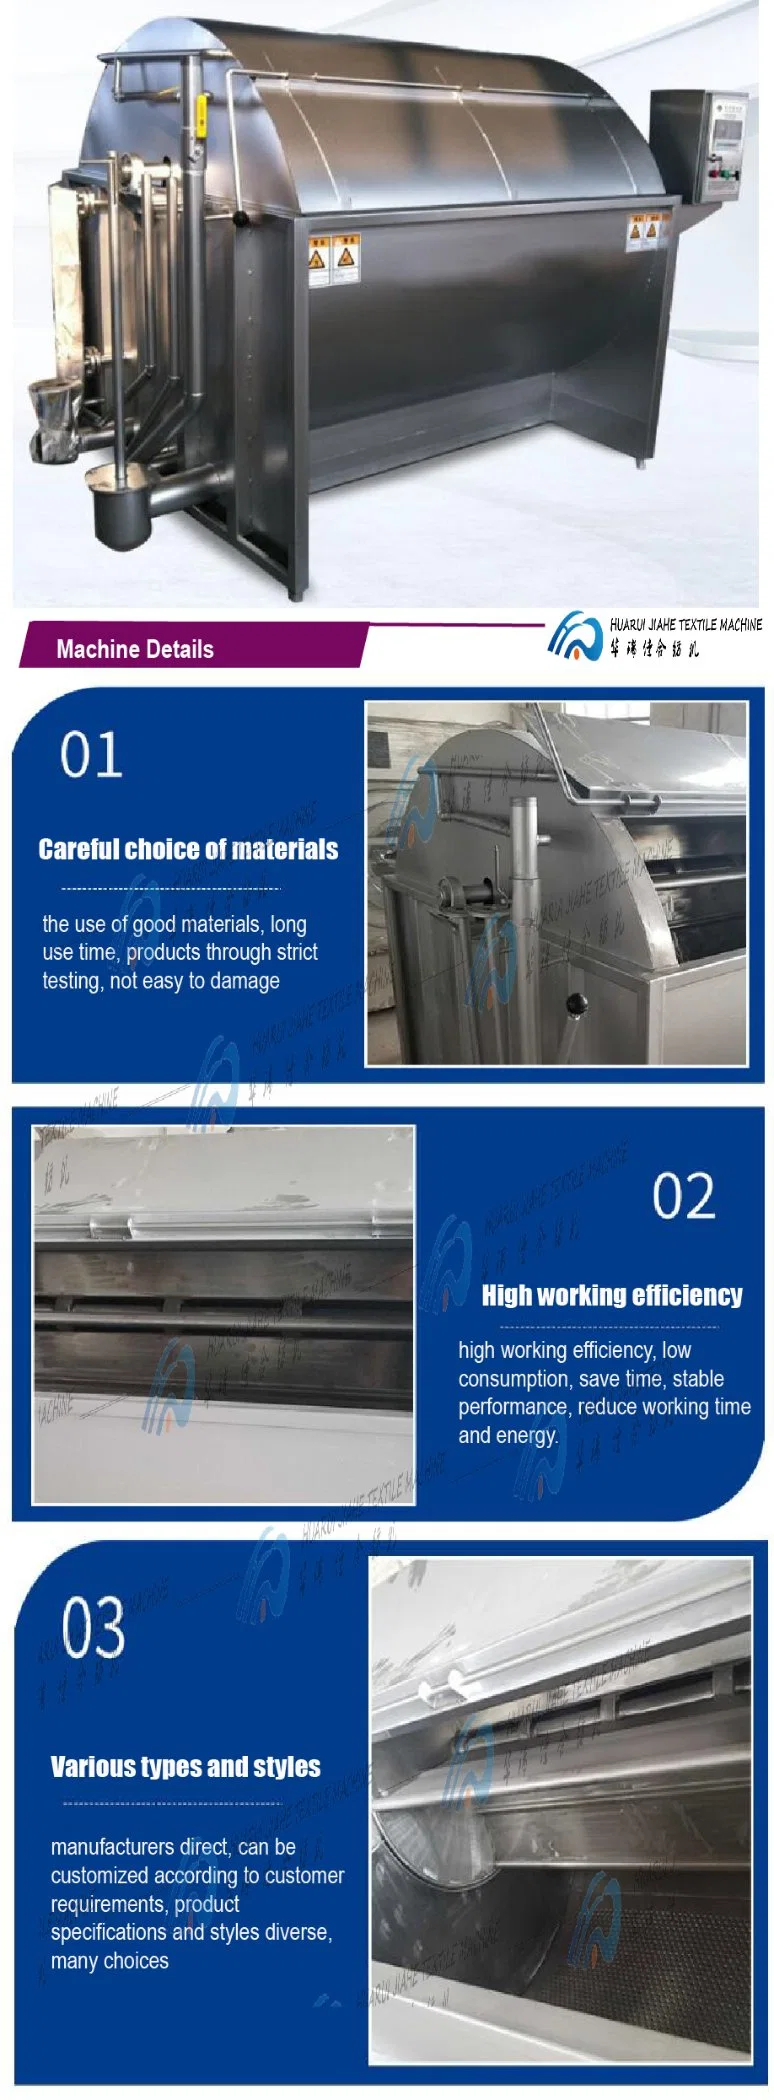 China Factory No Cast Changed Impeller Type Garment Dyeing Machine, All Stainless Steel Material, Fiber Fabric for Garment Dyeing, Factory Direct Sales